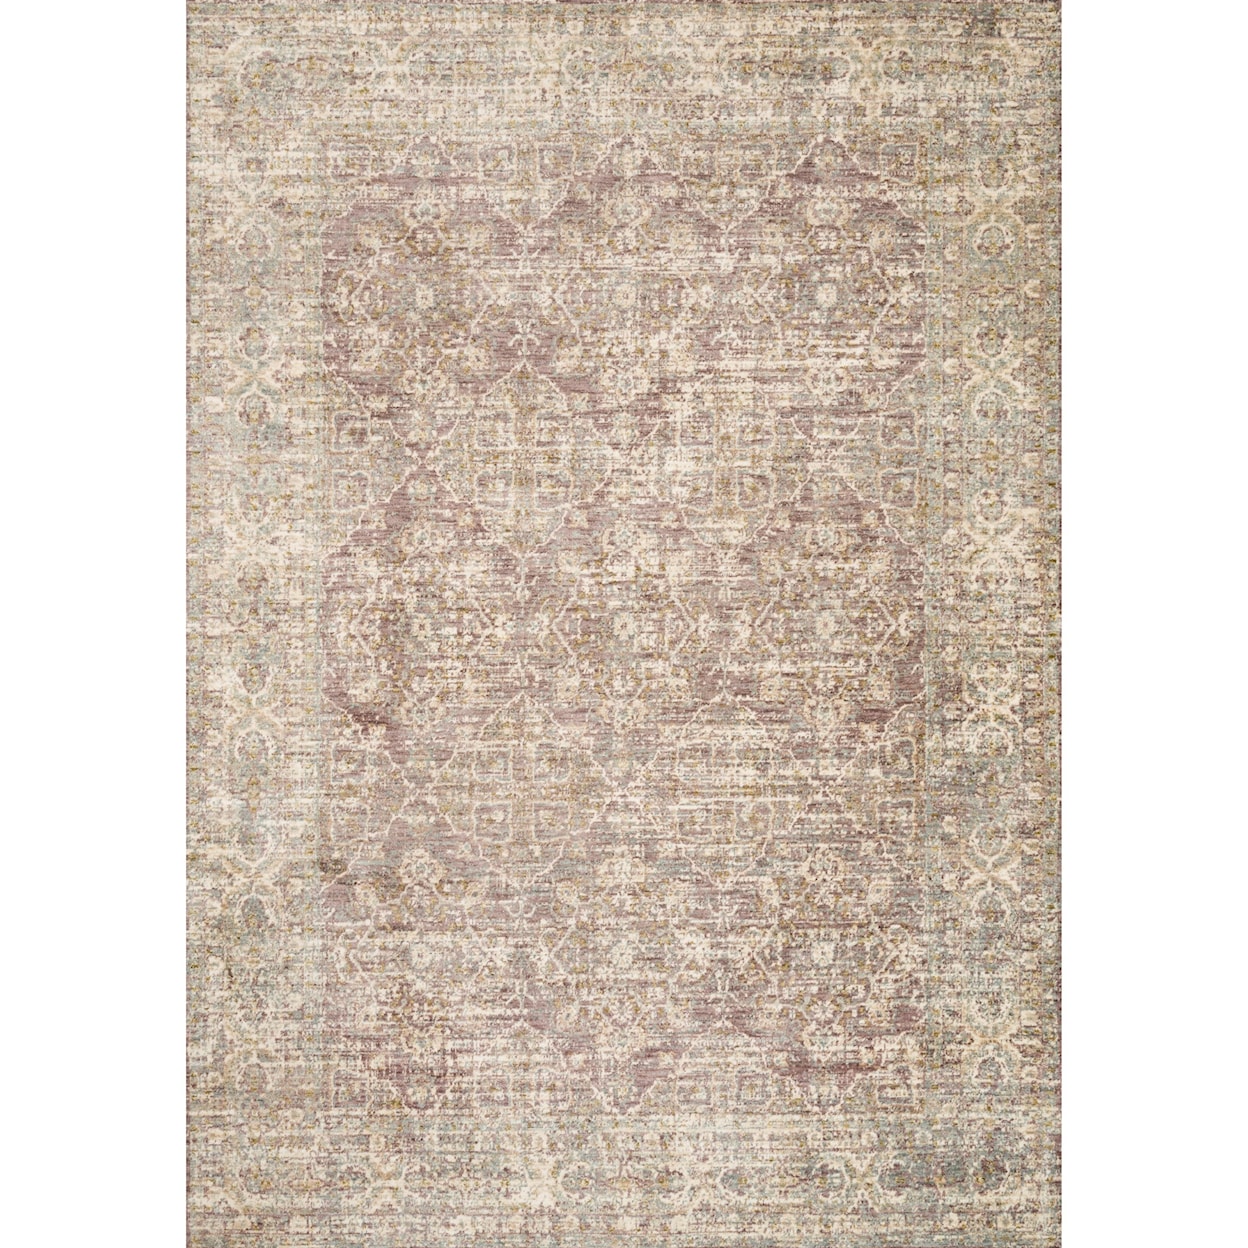 Loloi Rugs Revere 7'10" x 7'10" Round Lilac Rug